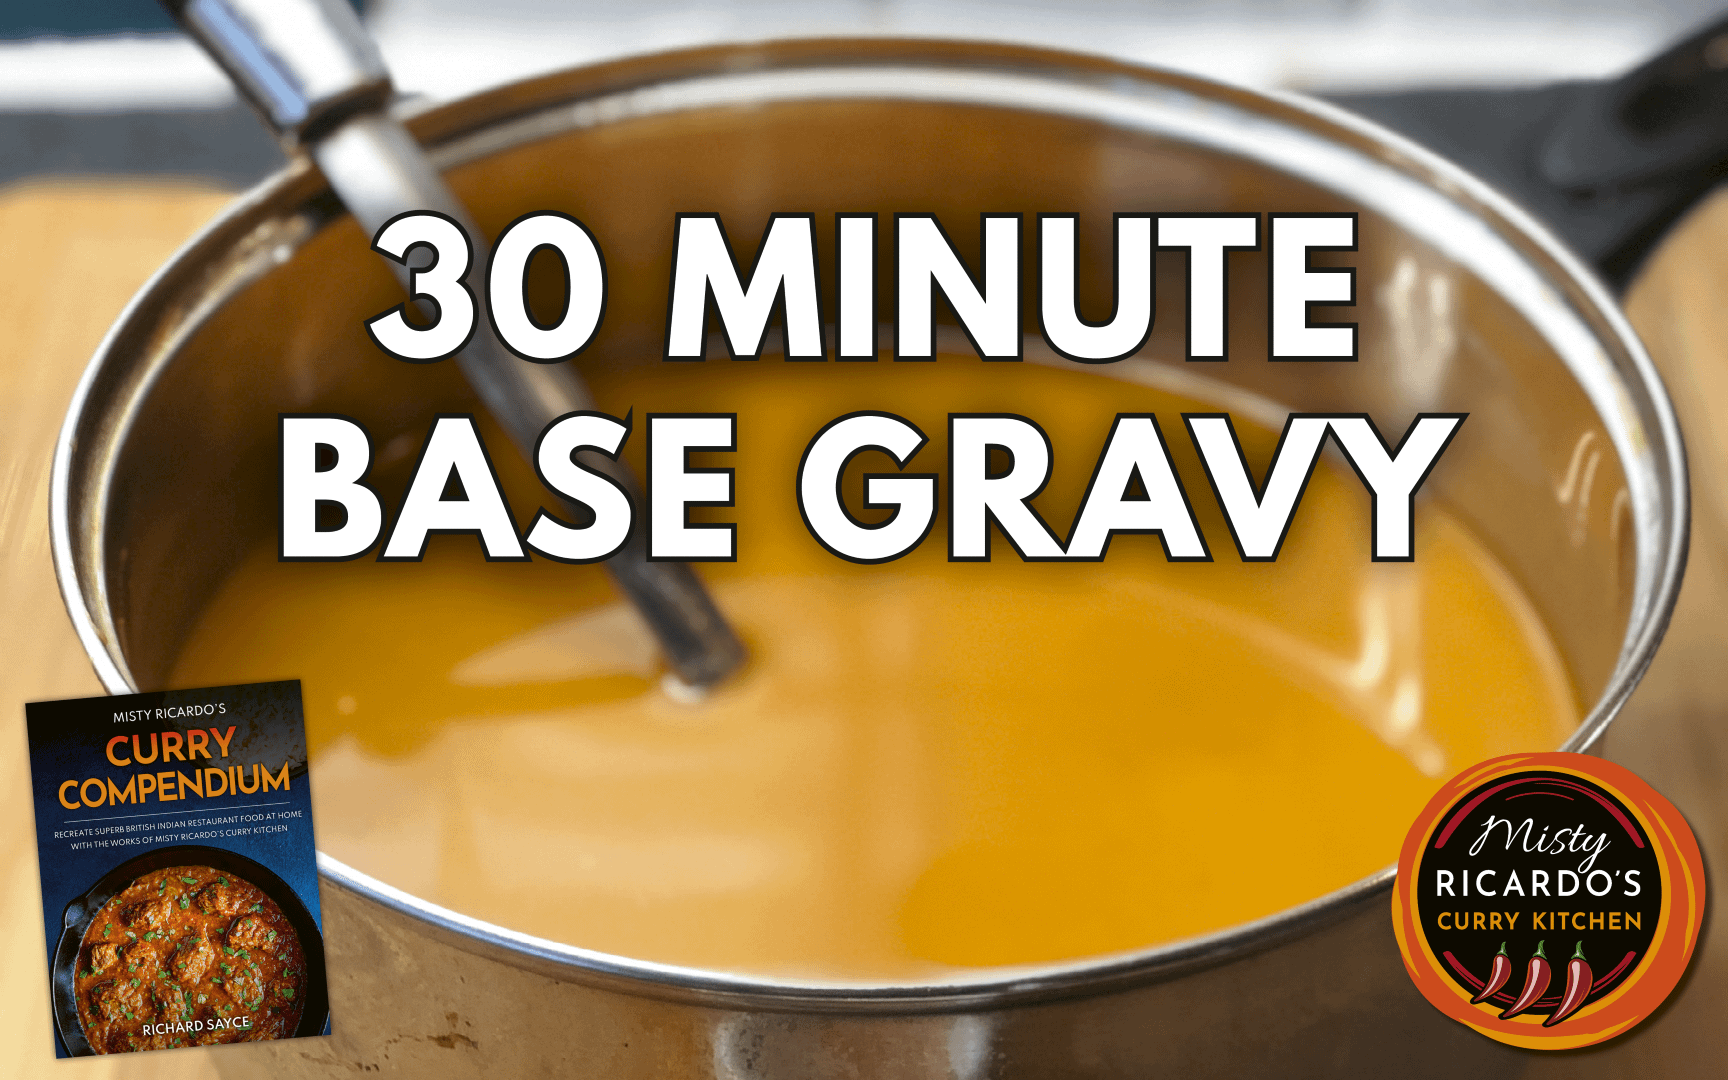 Quick Easy 30 Minute Base Gravy Recipe for Curries